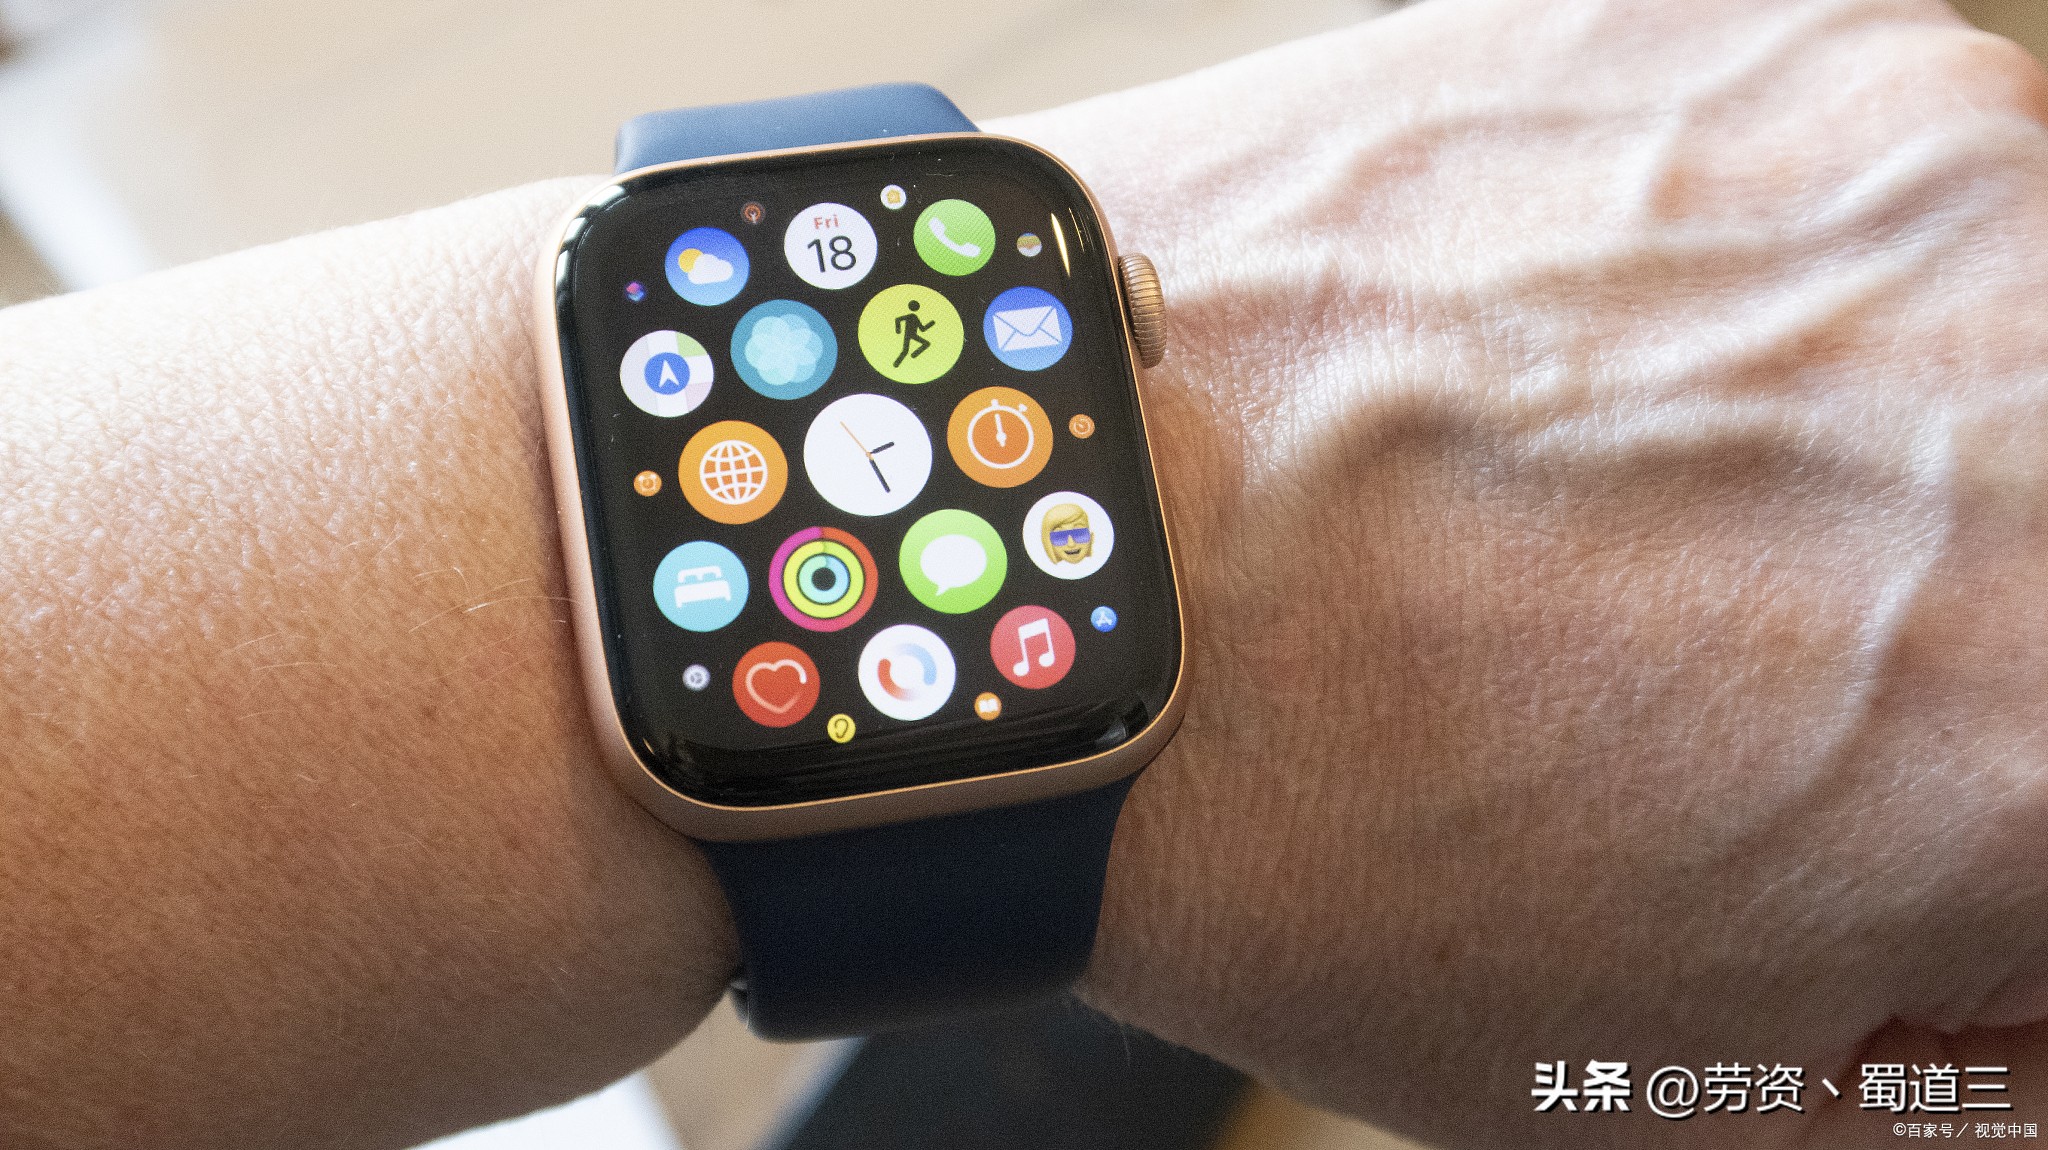 Apple Watch side button stuck or not working? 6 fixes to try - iMedia